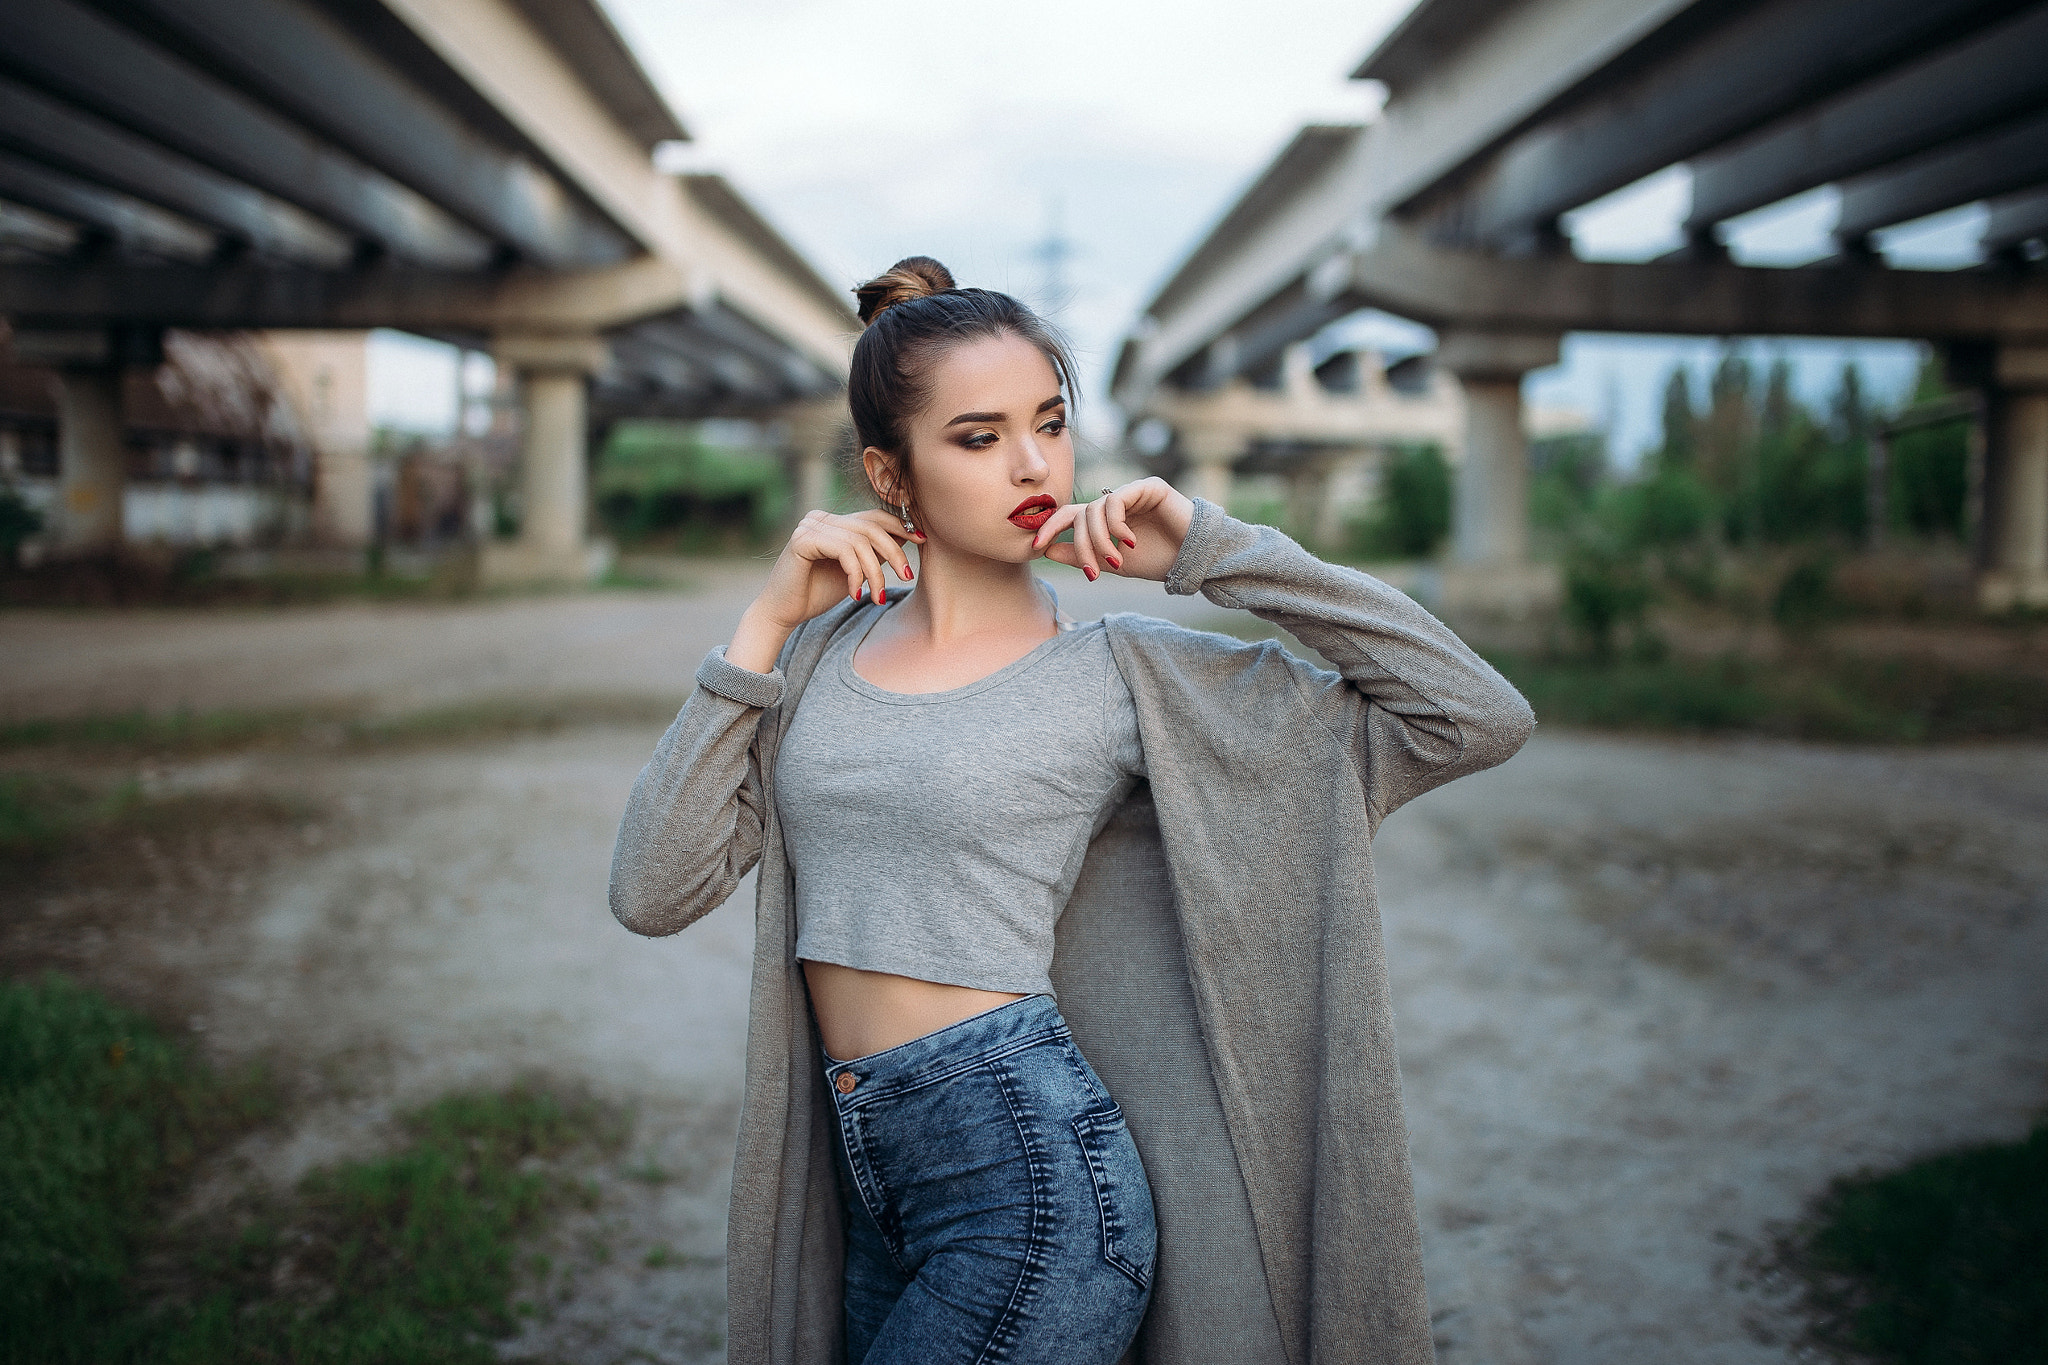 Women Red Lipstick Jeans Hairbun Red Nails Women Outdoors Portrait Grey Sweater Looking Away Grey To 2048x1365